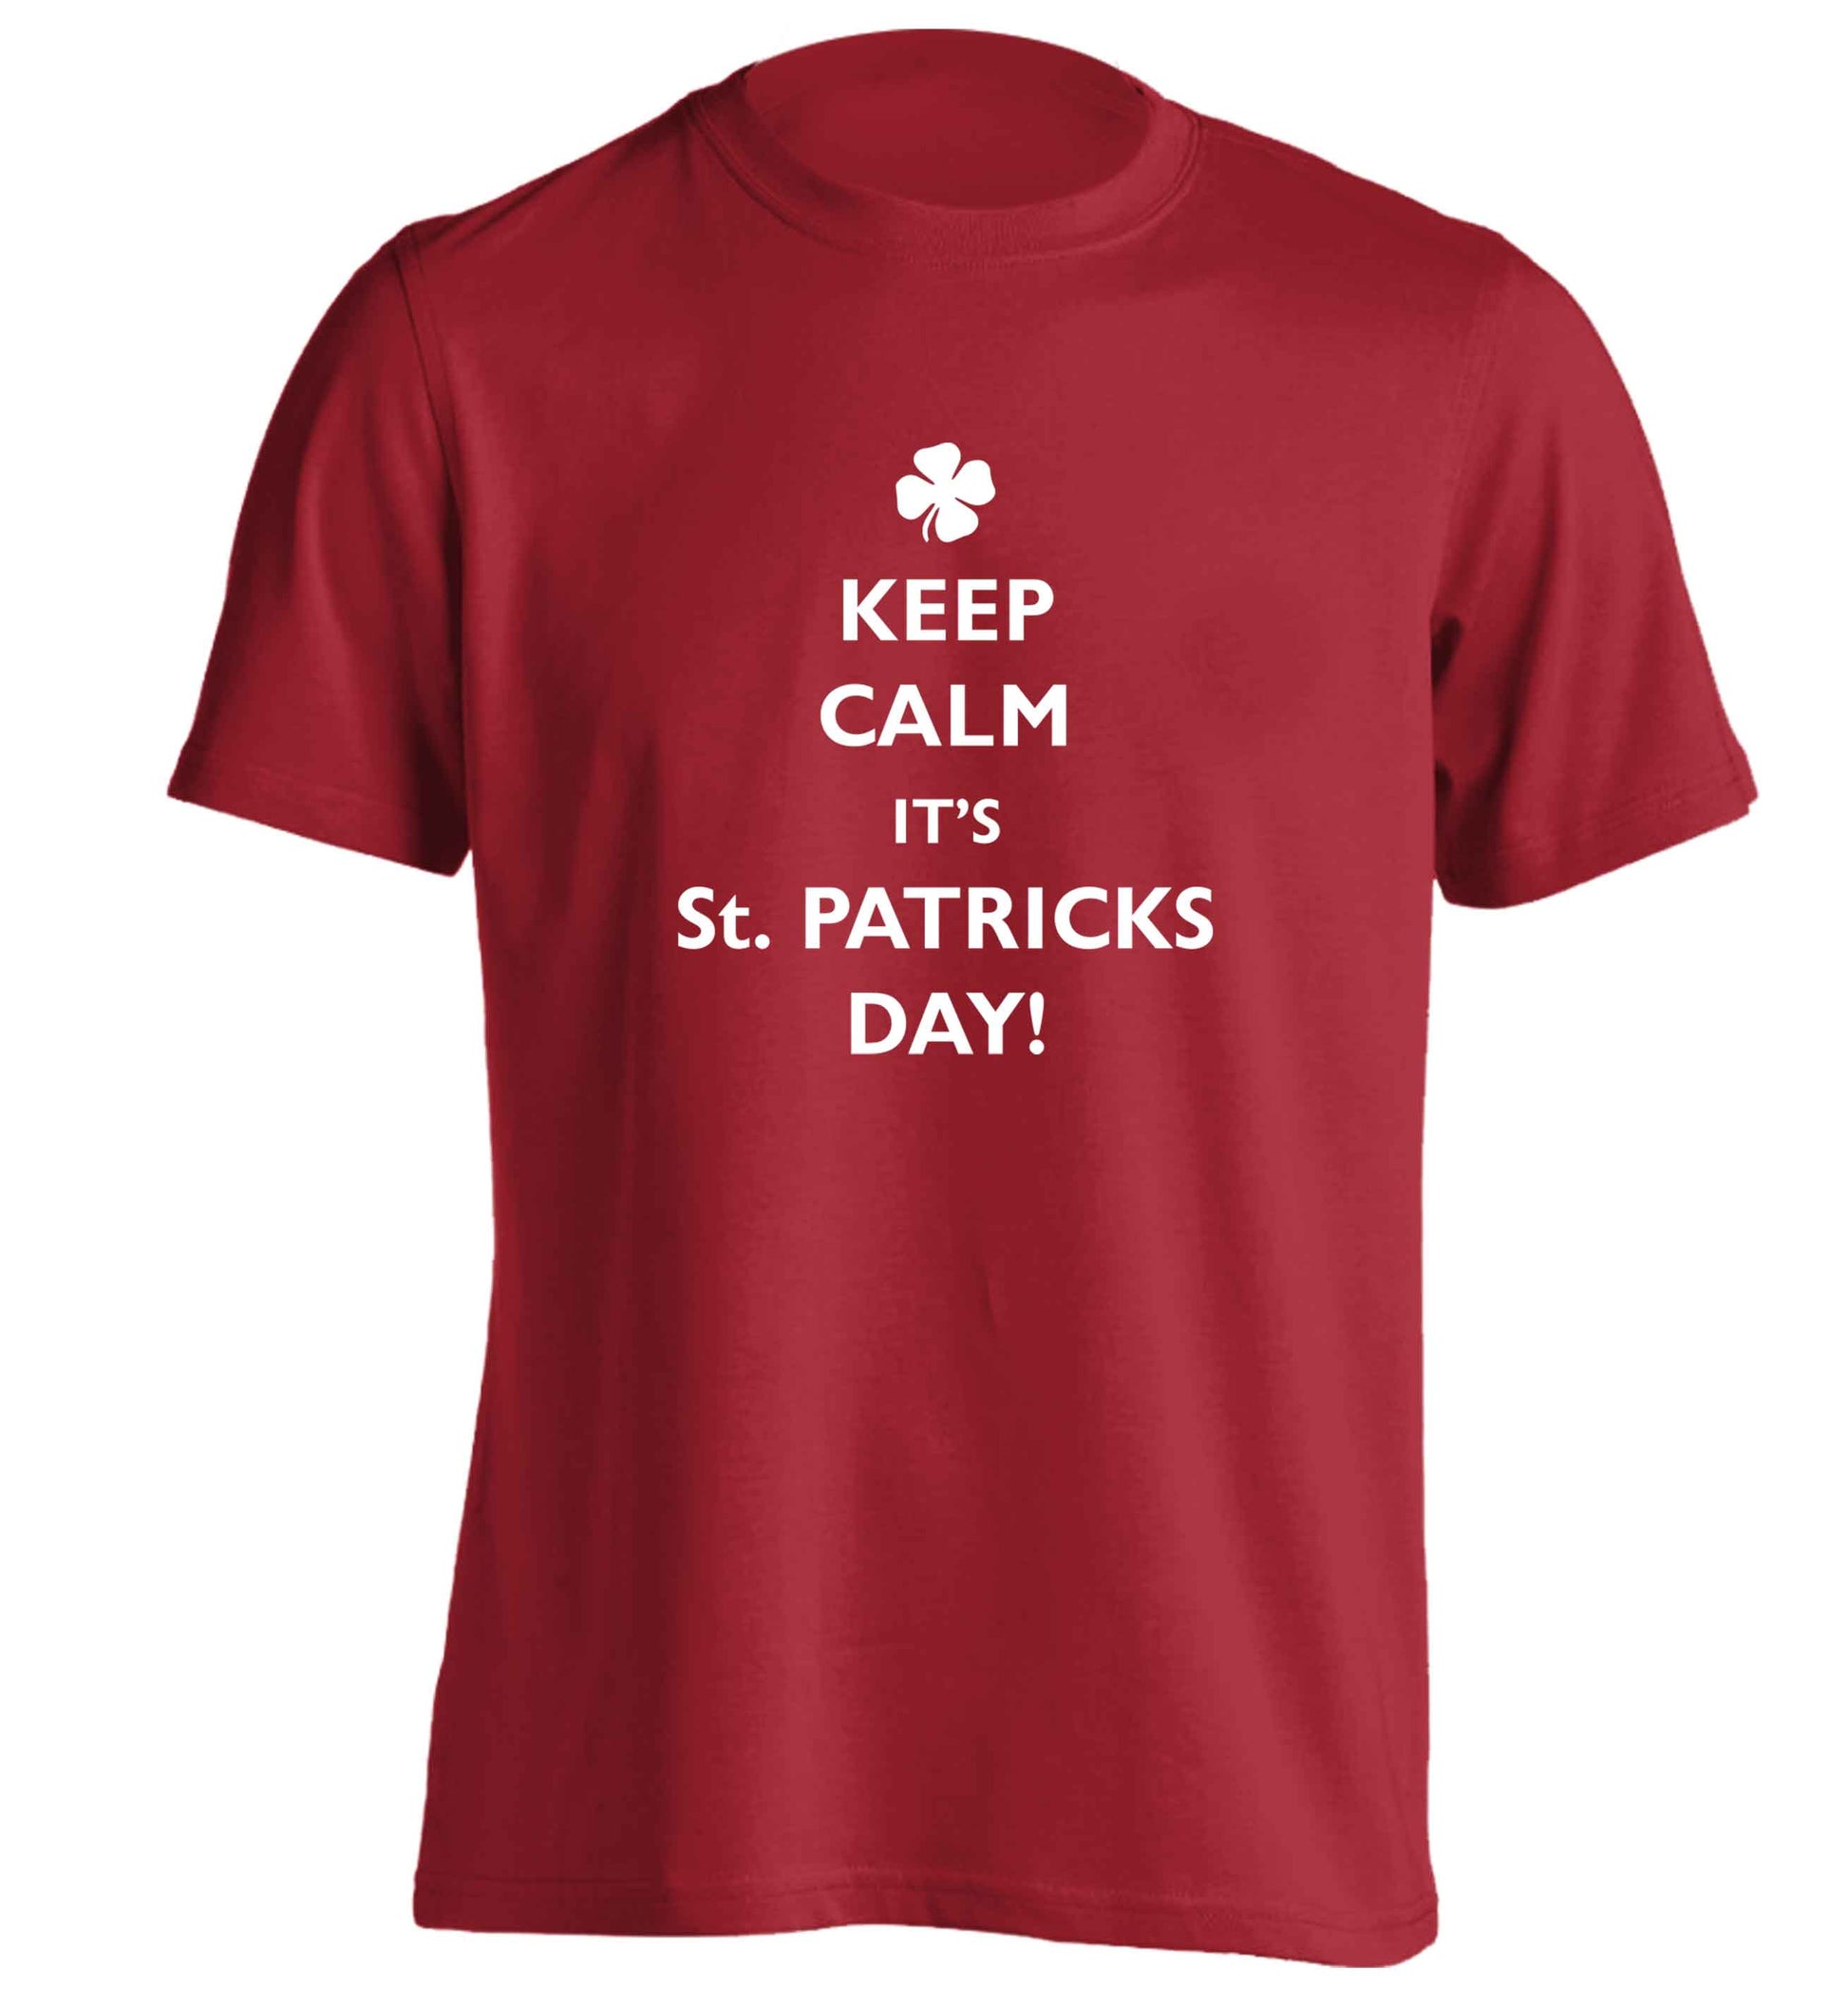 Keep calm it's St.Patricks day adults unisex red Tshirt 2XL